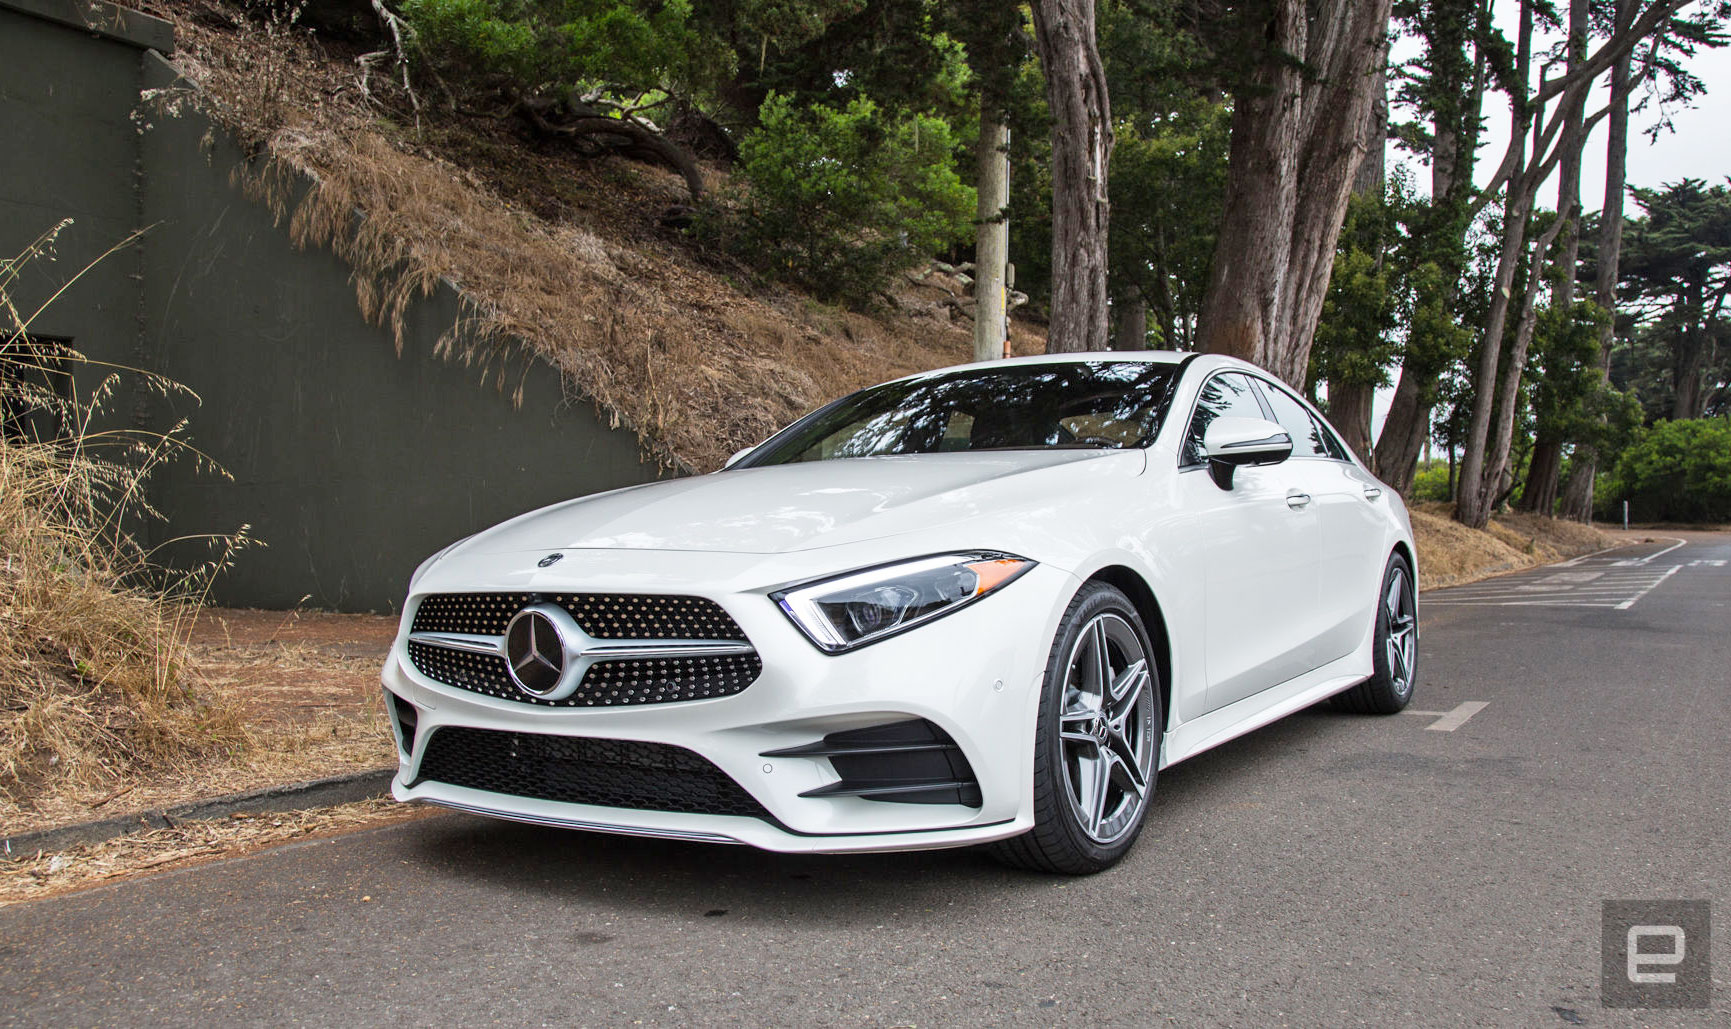 Leopardo Facilitar travesura The Mercedes CLS 450 is a luxury mild hybrid for hipsters | Engadget